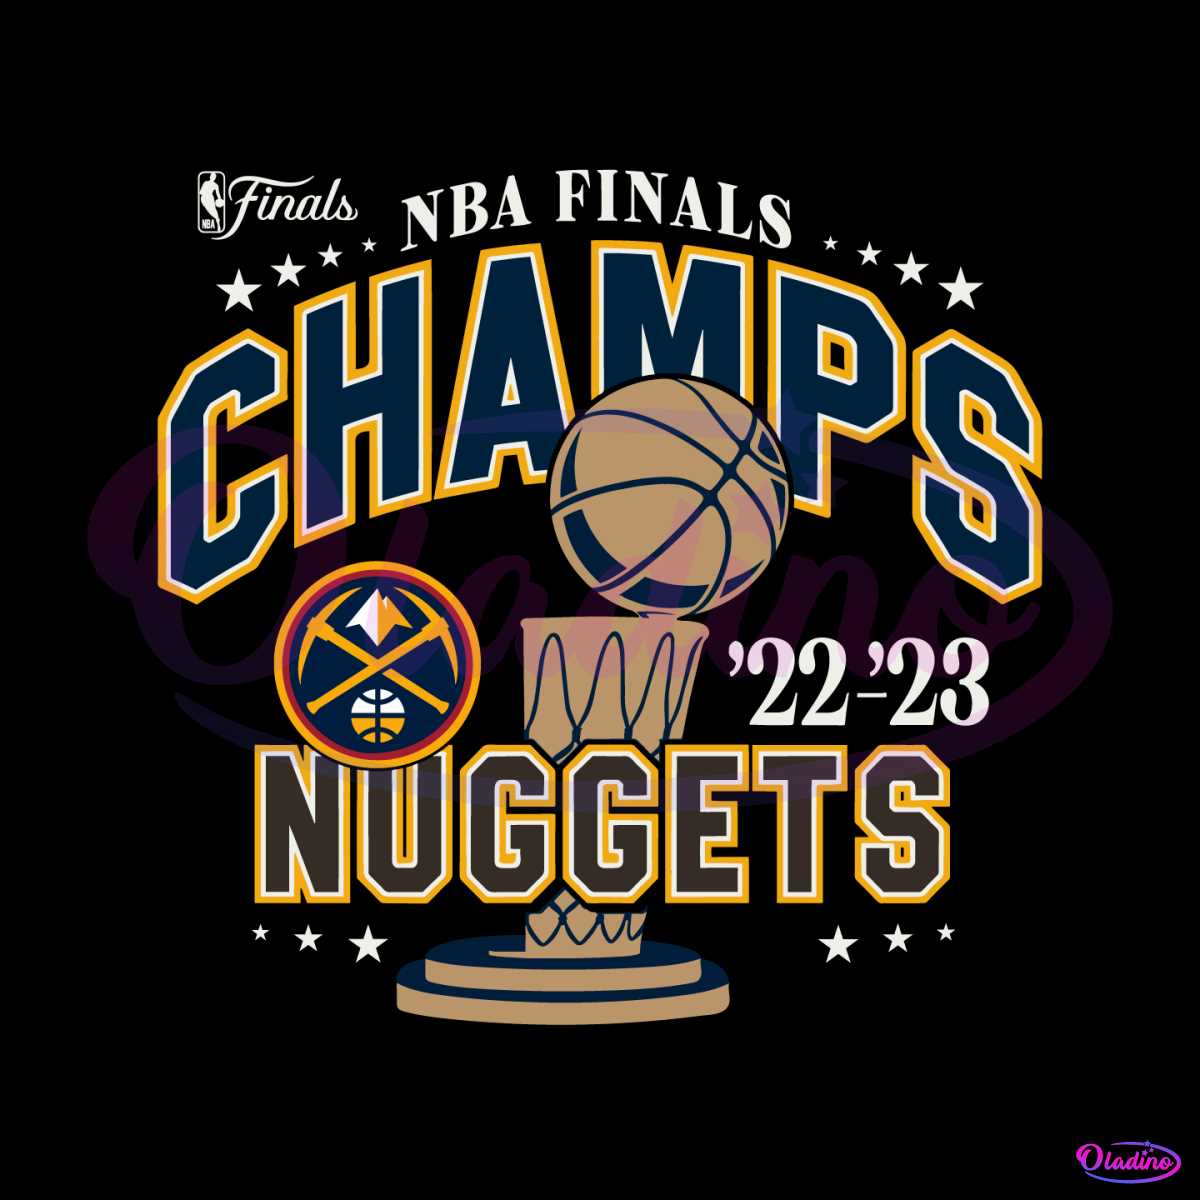 SportsLogos.Net - Our NBA Champions logo page has been